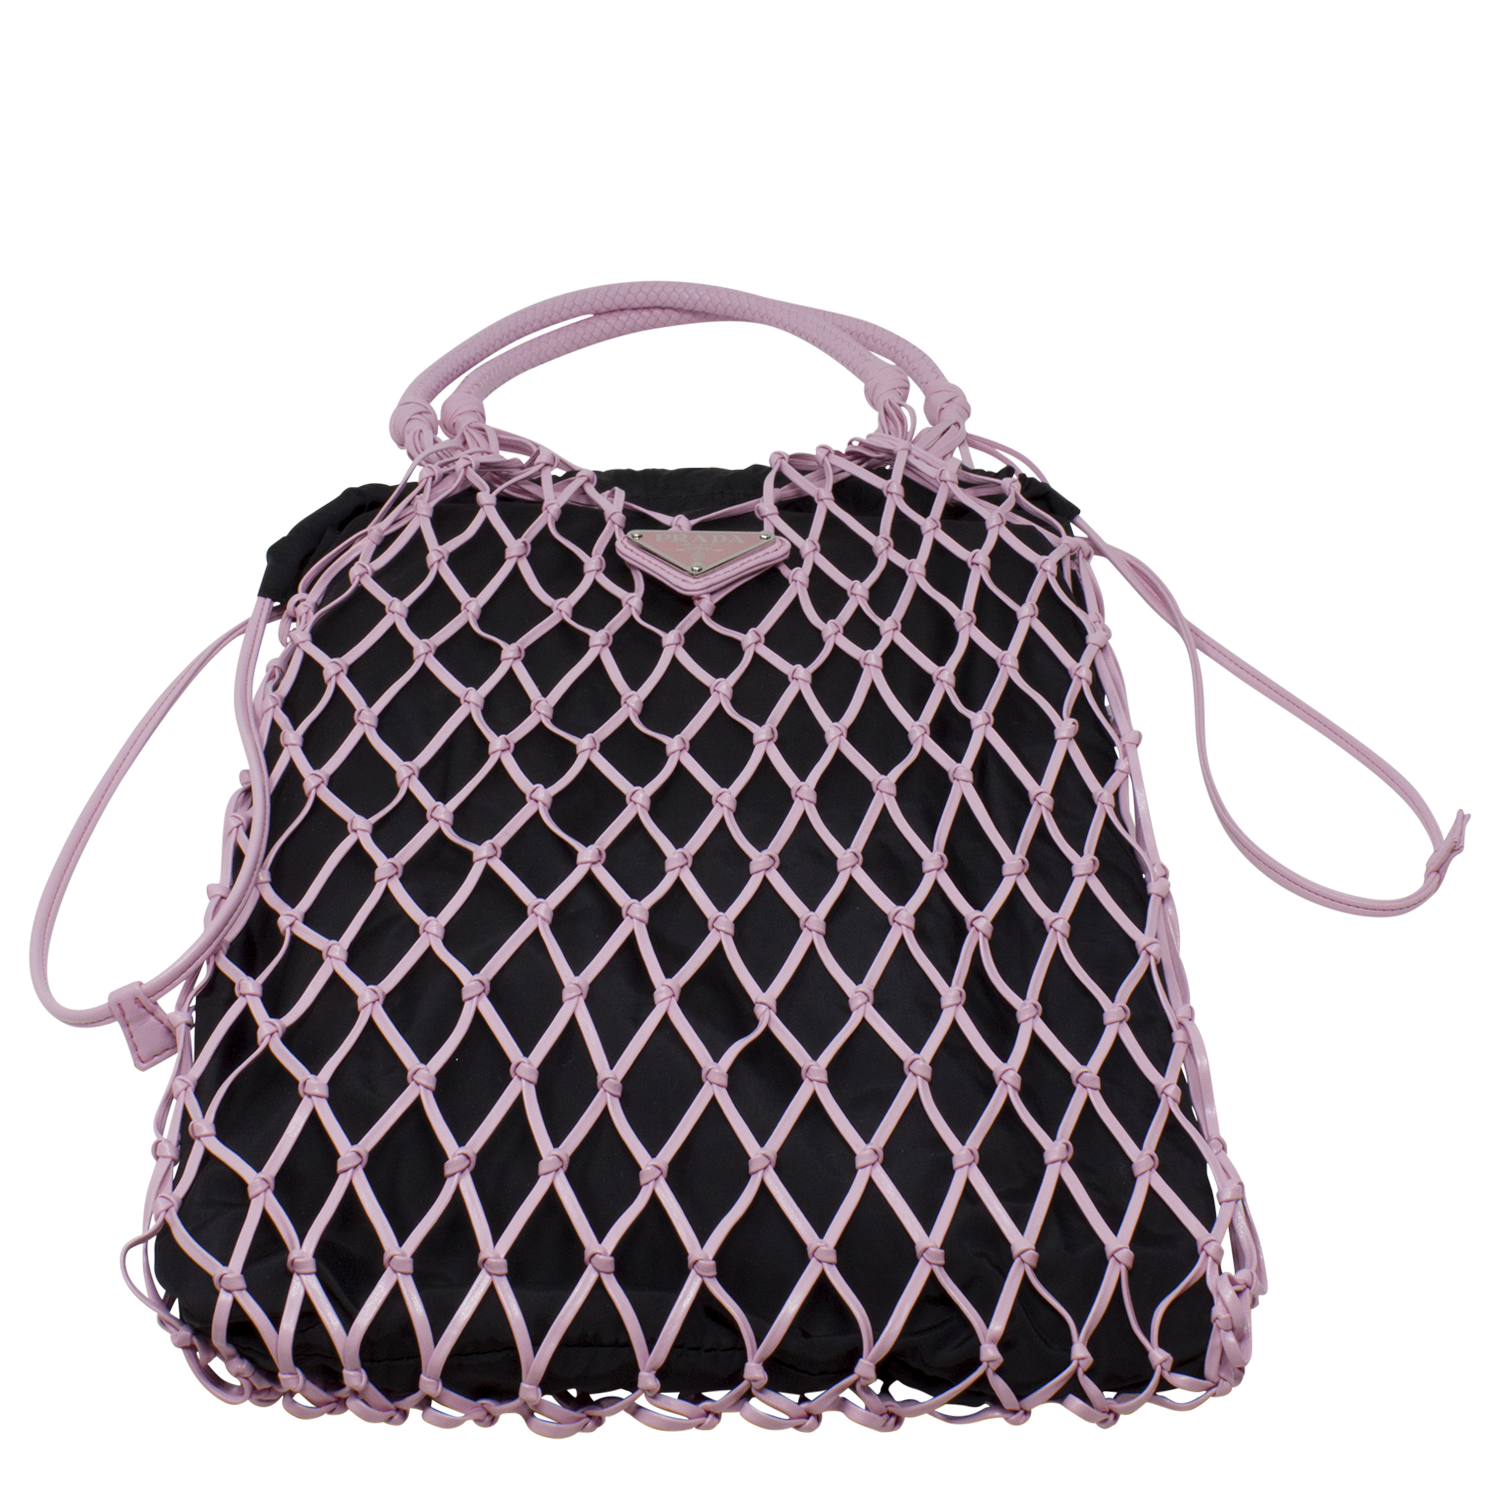 Prada Small Leather Net Bag in Pink